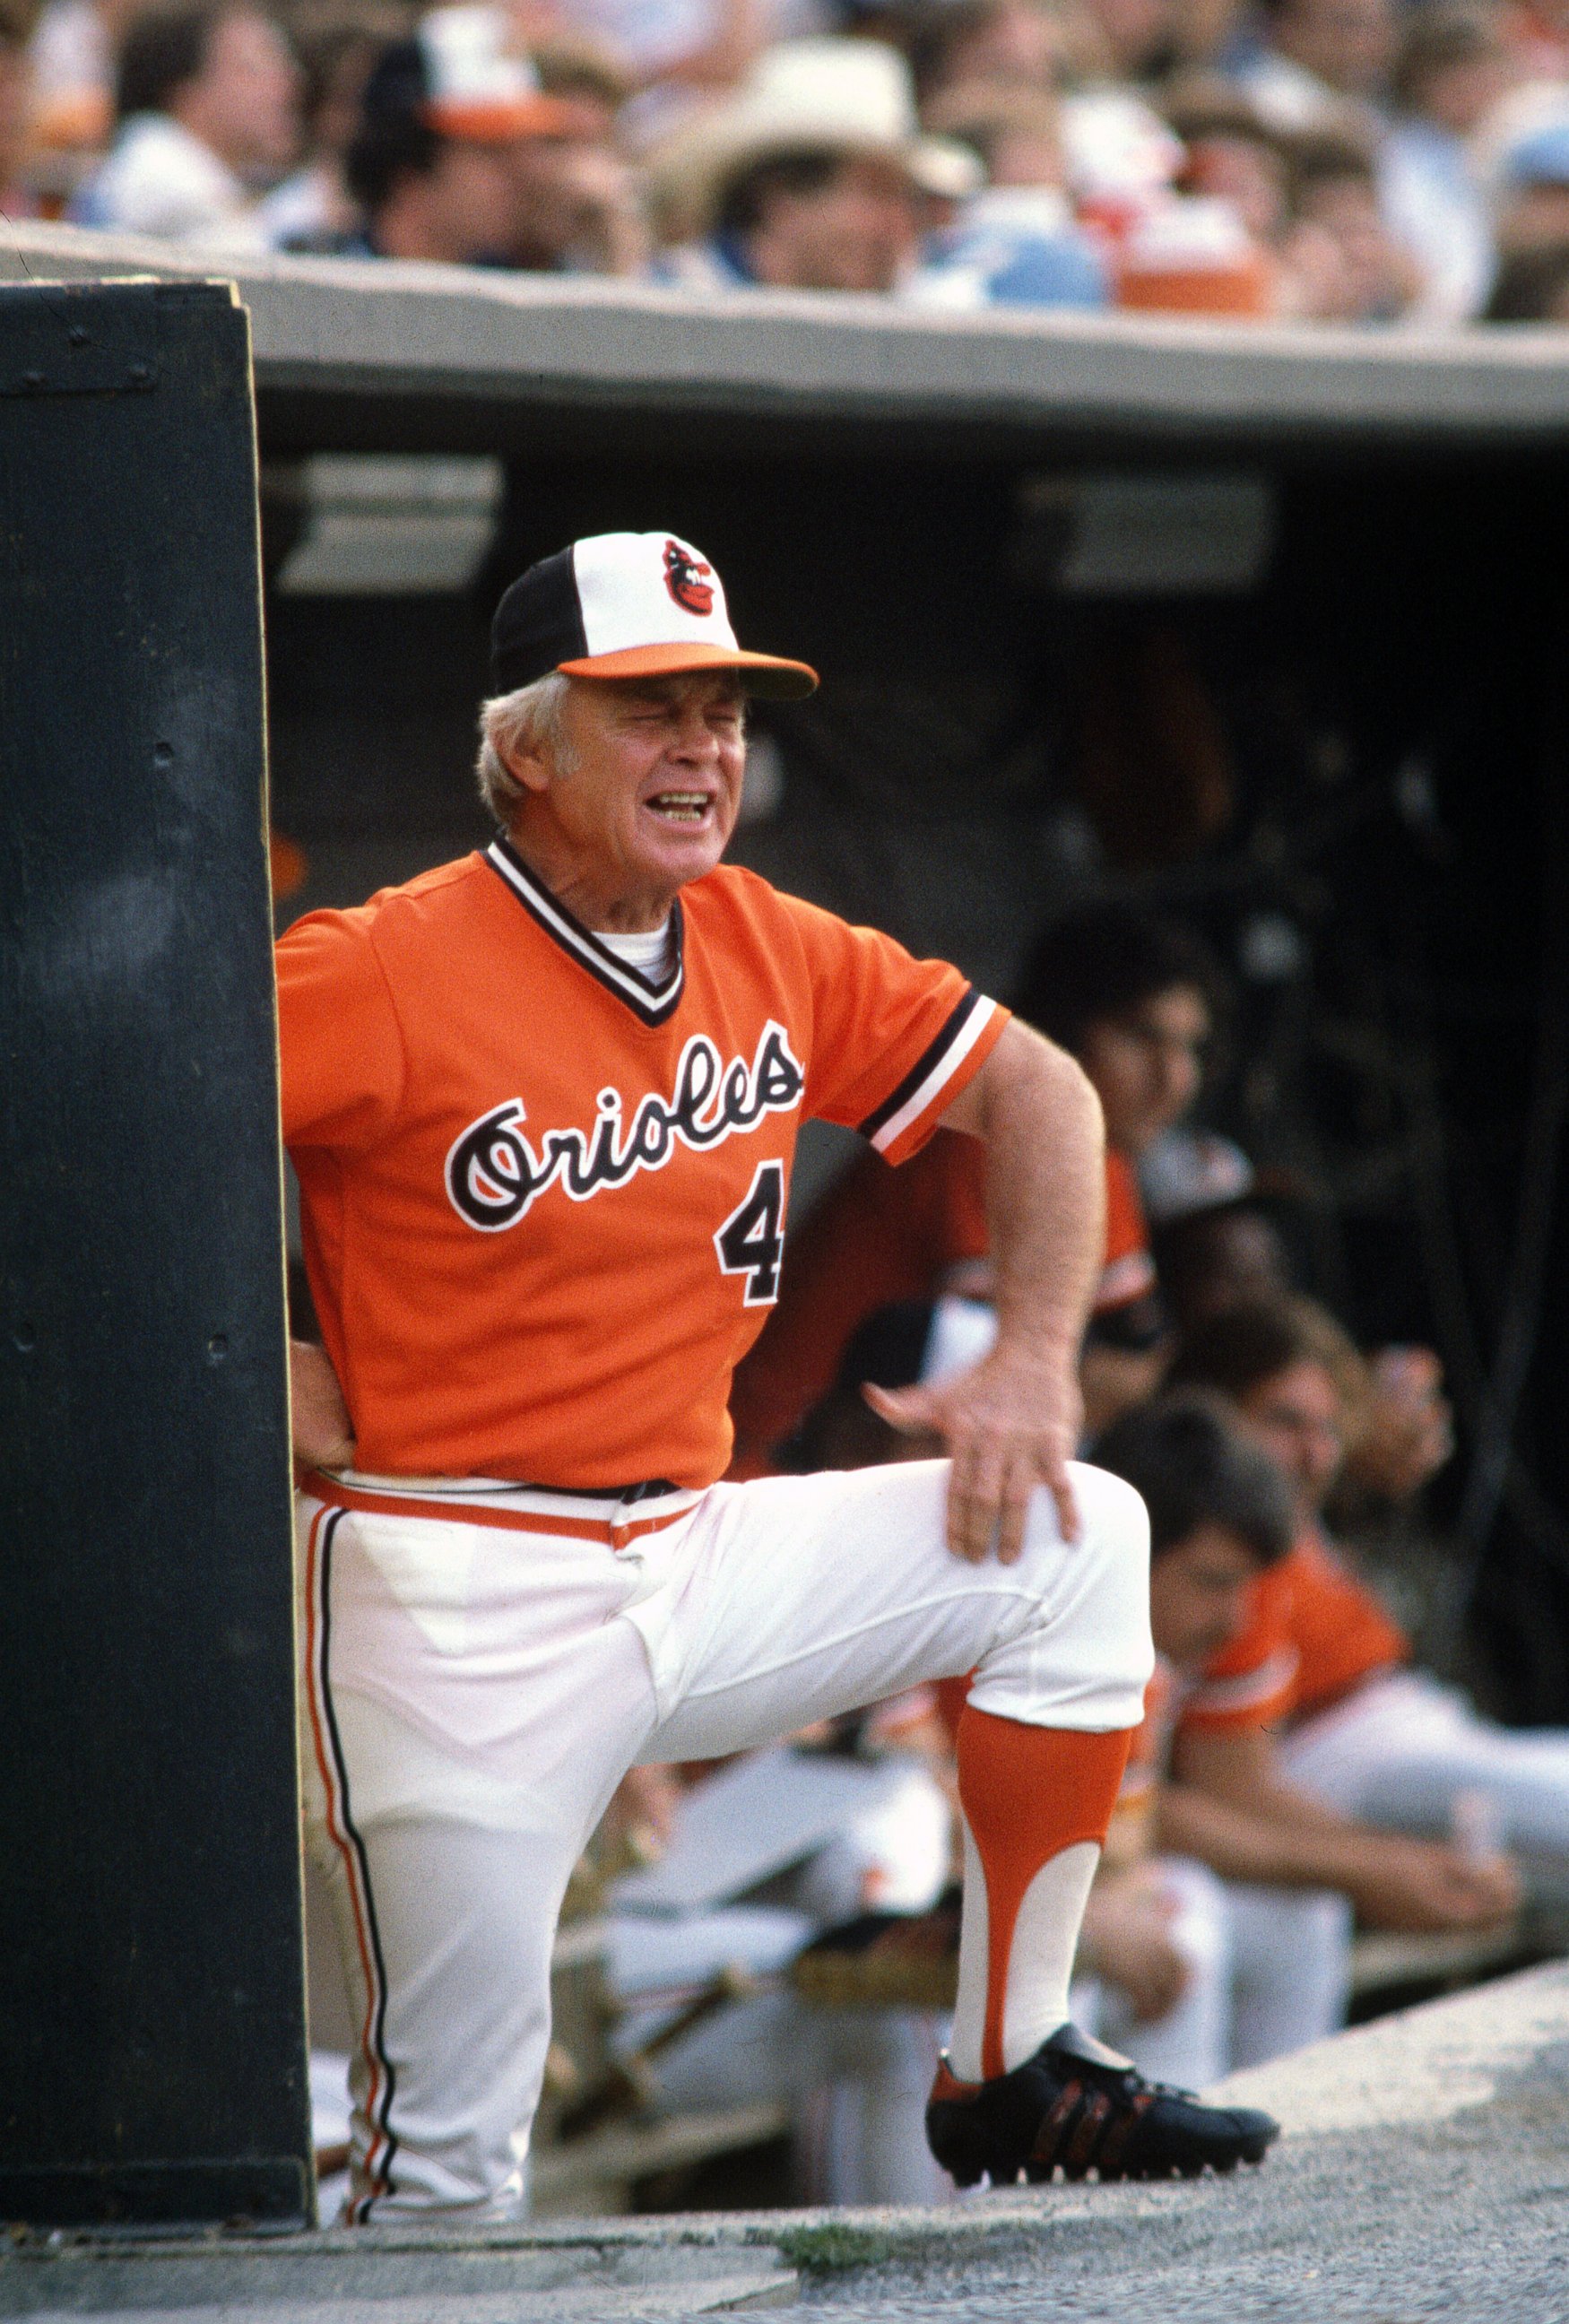 PHOTO: Manager Earl Weaver of the Baltimore Orioles looks on from the top of the dugout steps during a Major League Baseball game in 1980 at Memorial Stadium in Baltimore, Md.